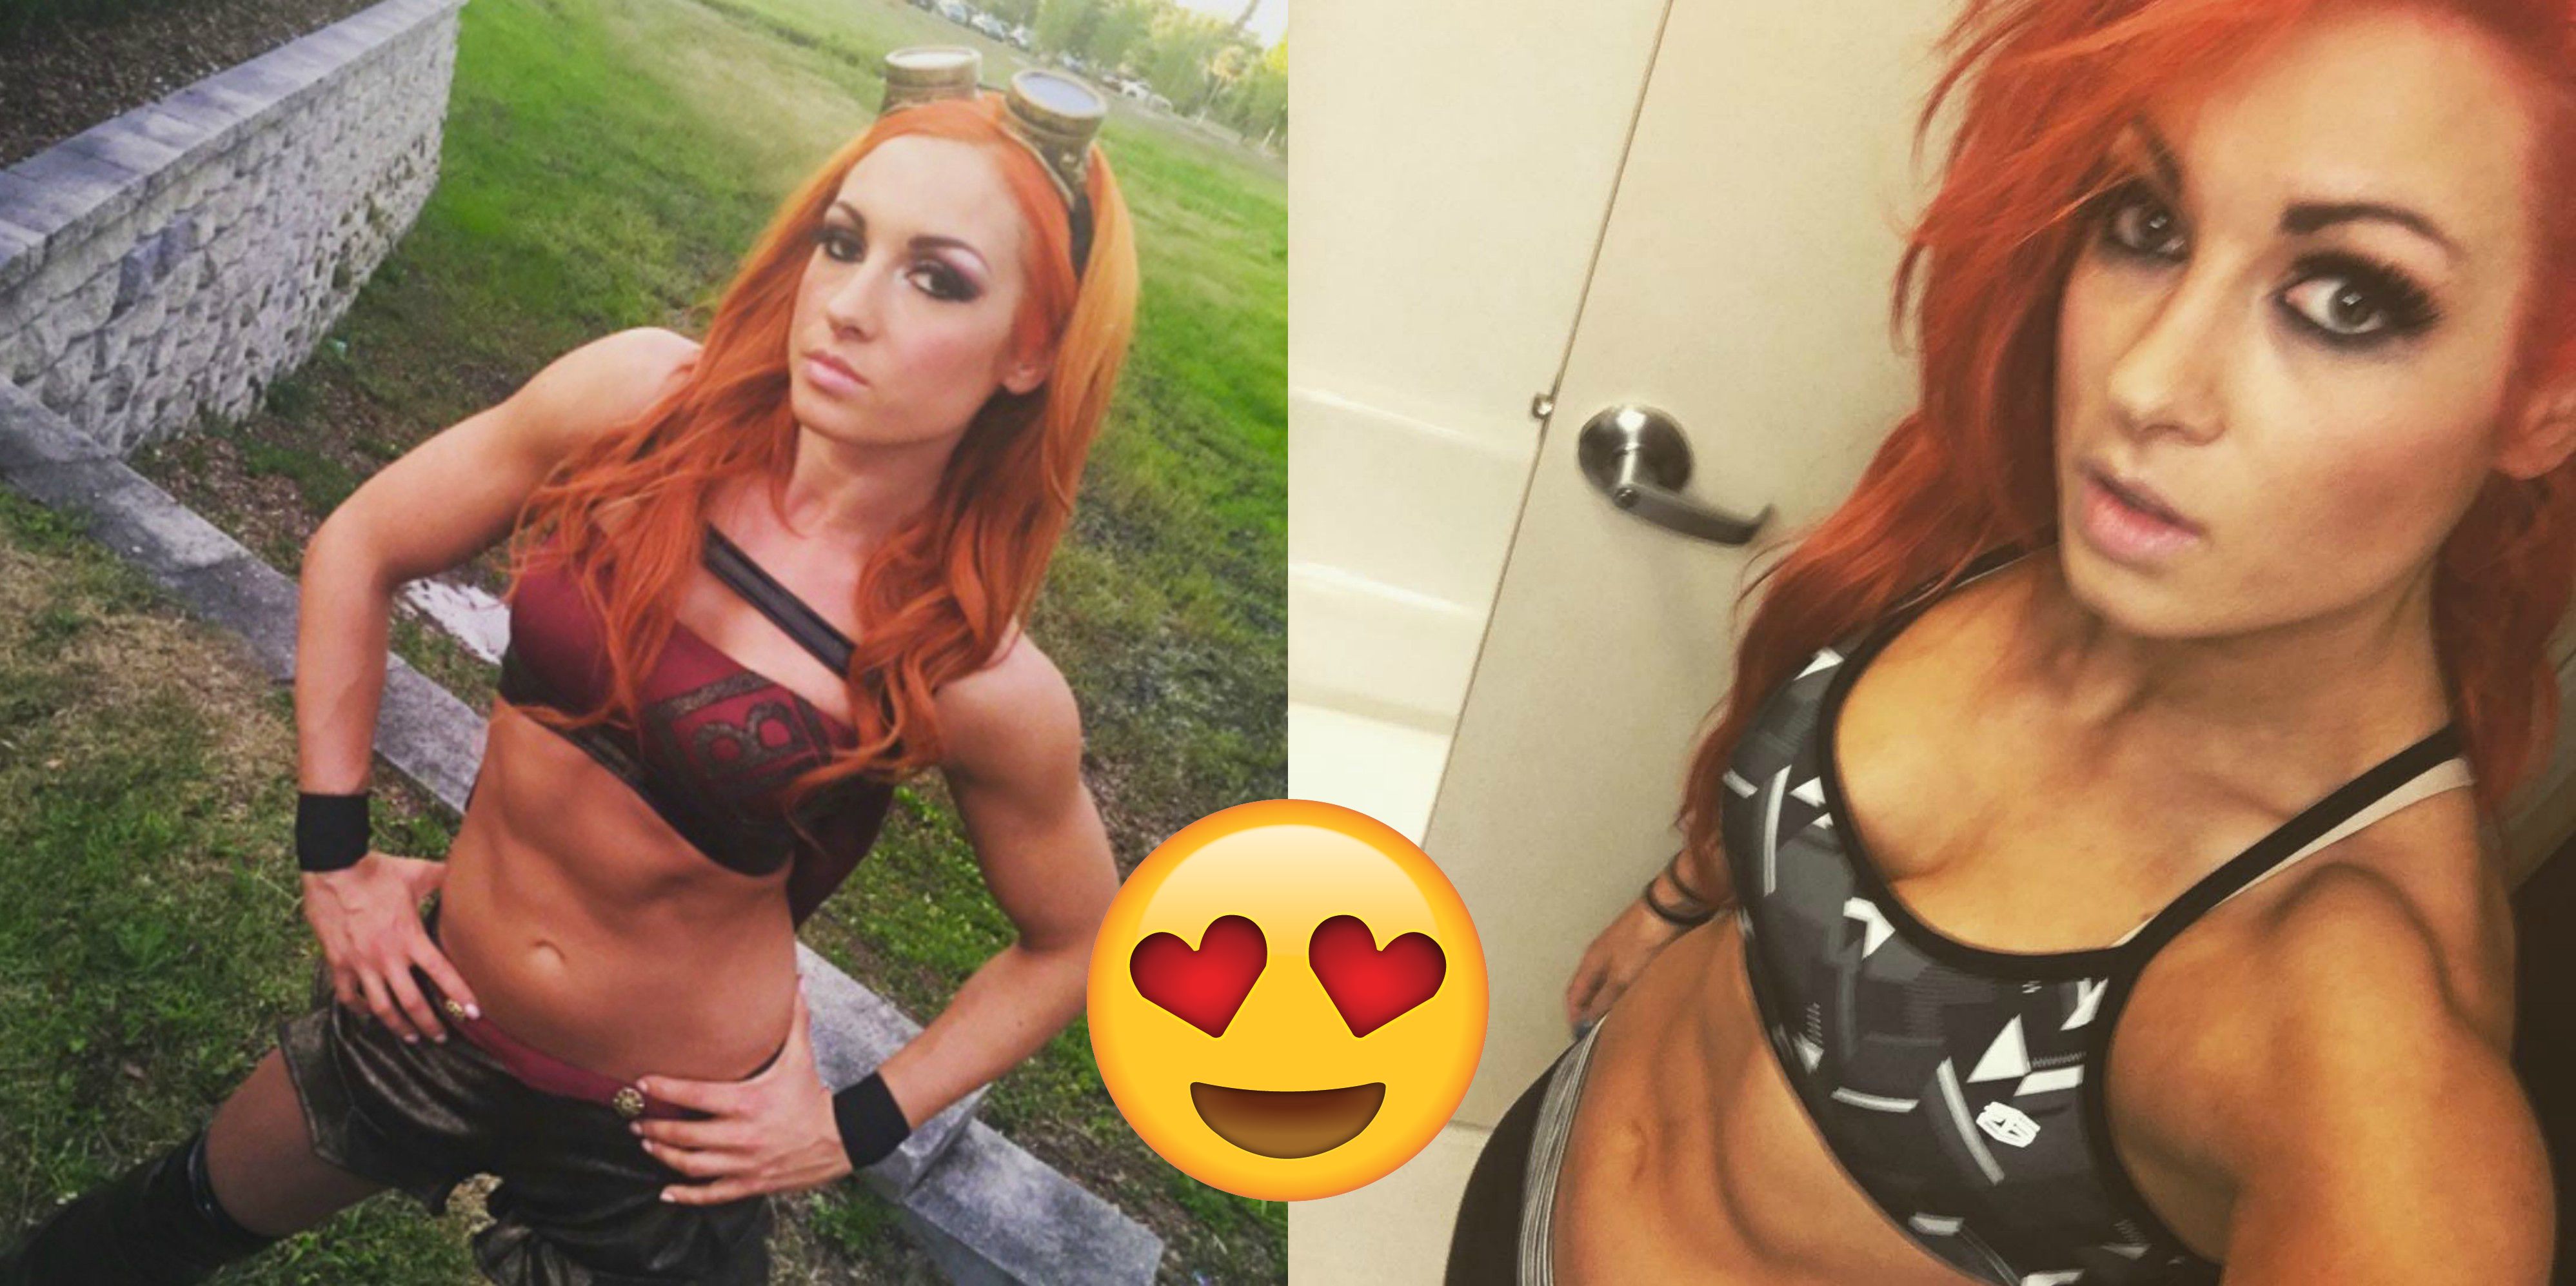 Becky lynch leaked photos - 🧡 Becky Lynch Hot Bikini Pictures - Sexiest Wr...